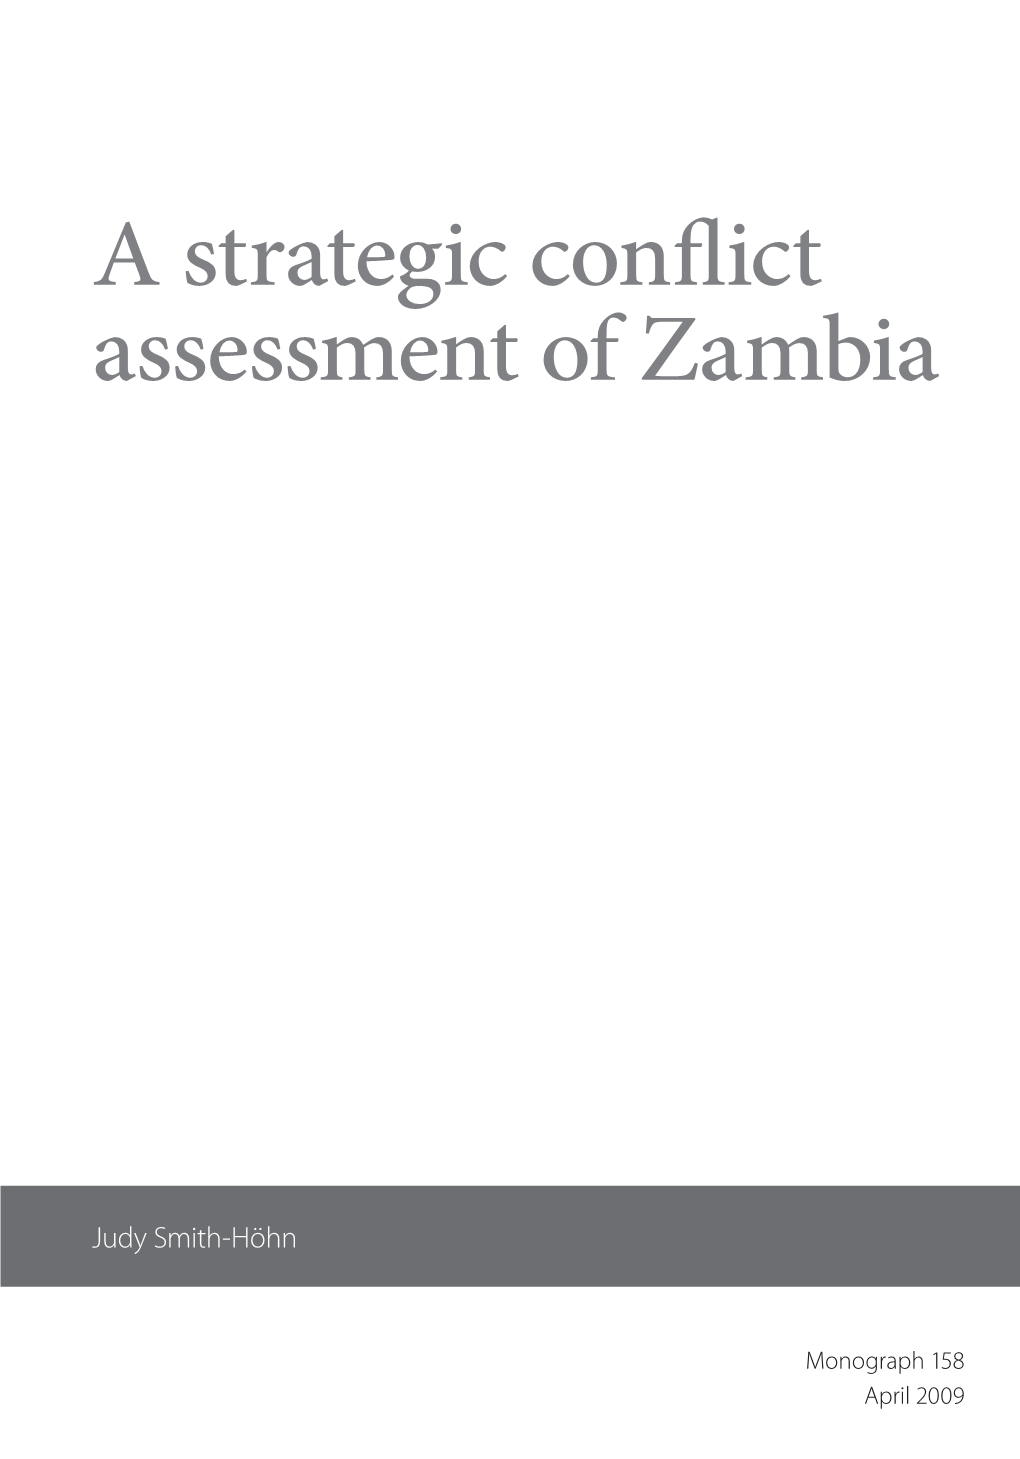 A Strategic Conflict Assessment in Zambia